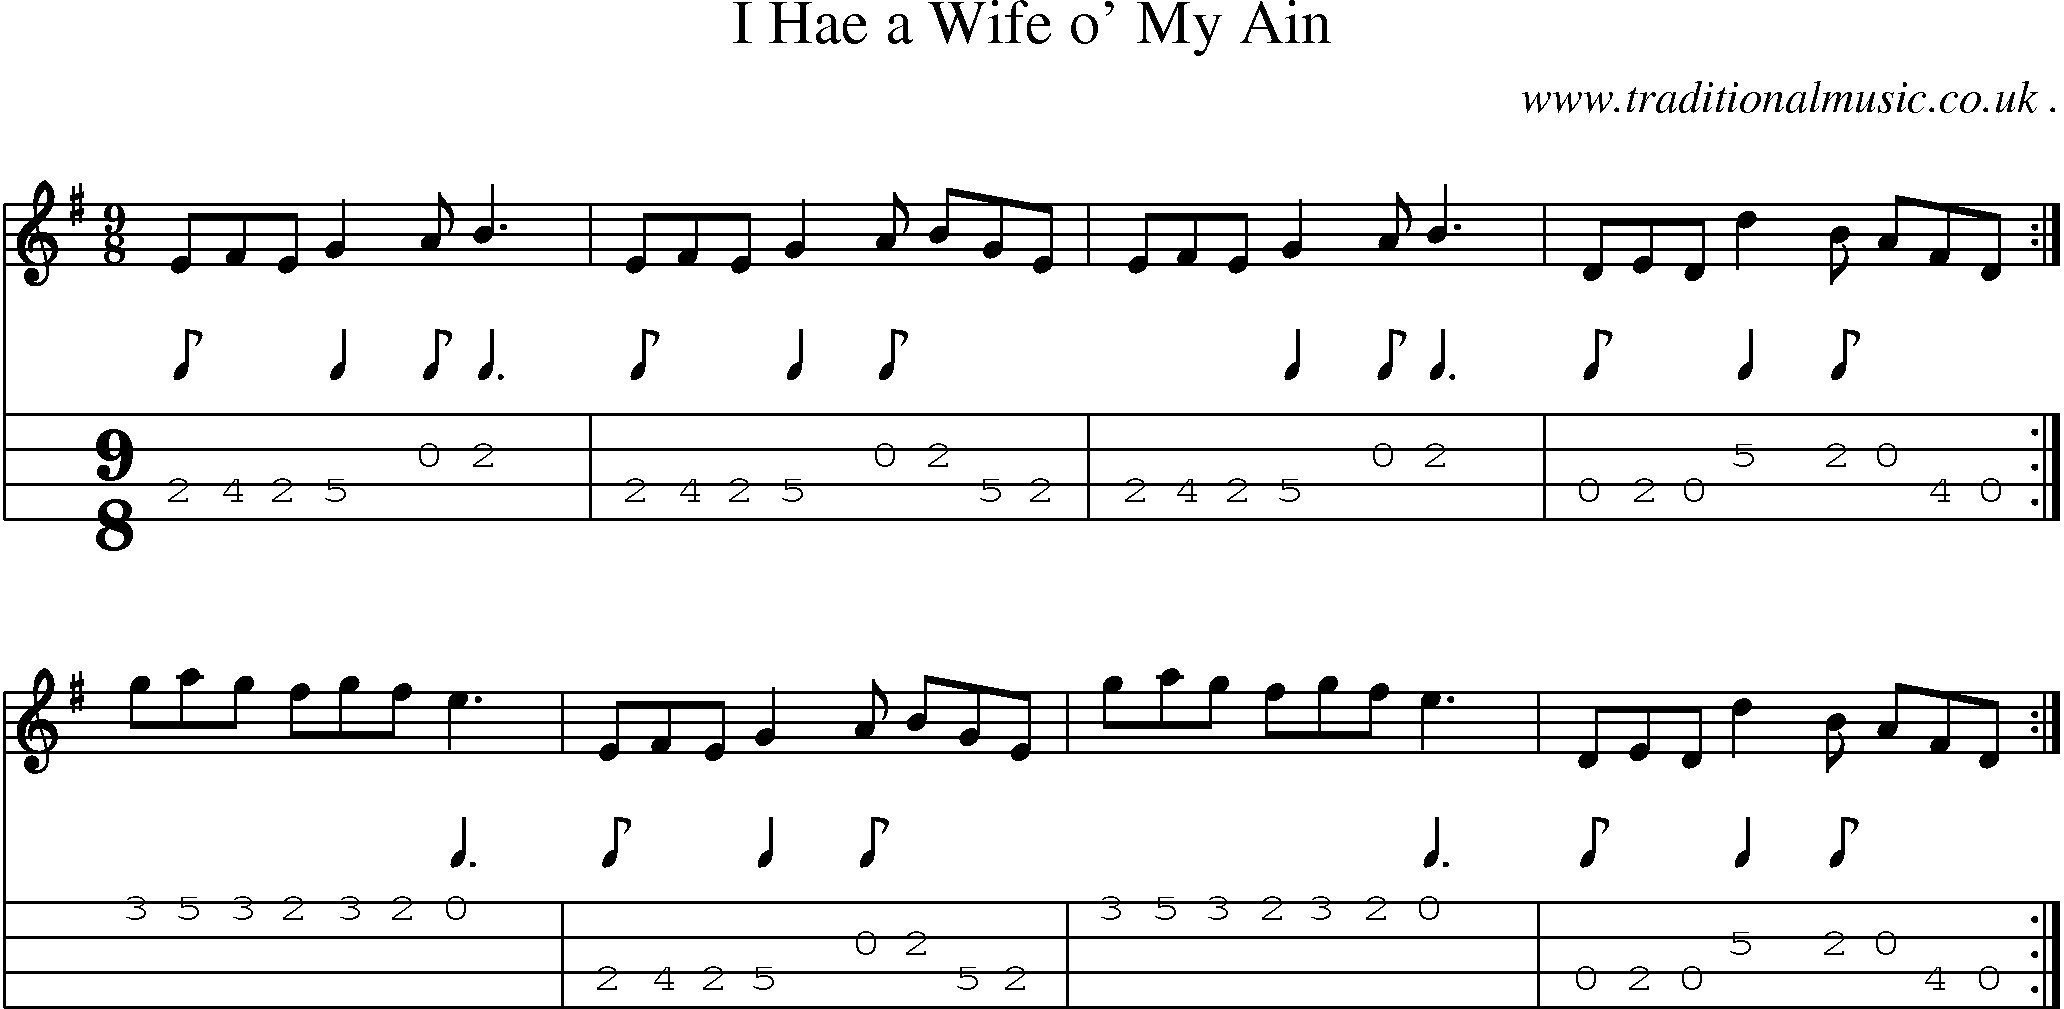 Sheet-music  score, Chords and Mandolin Tabs for I Hae A Wife O My Ain